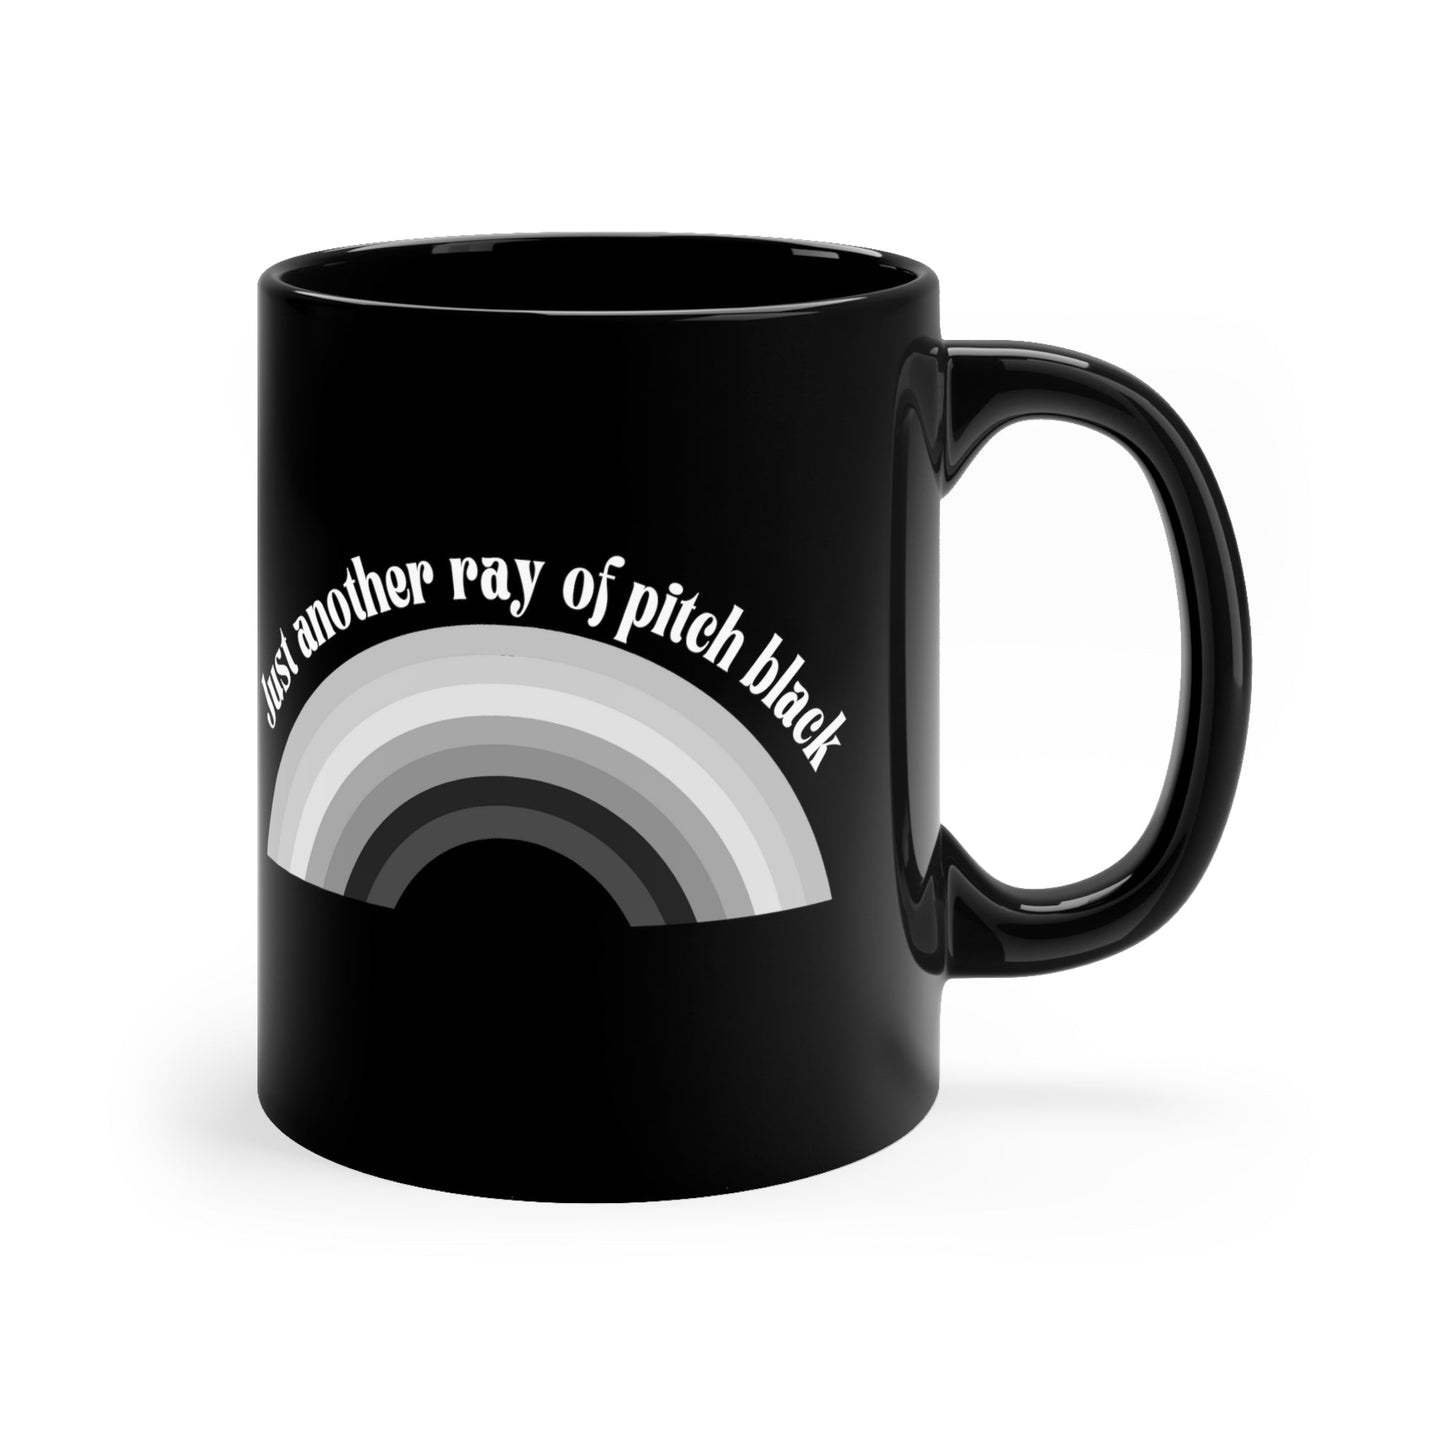 Just Another Ray of Pitch Black 11oz Black Mug